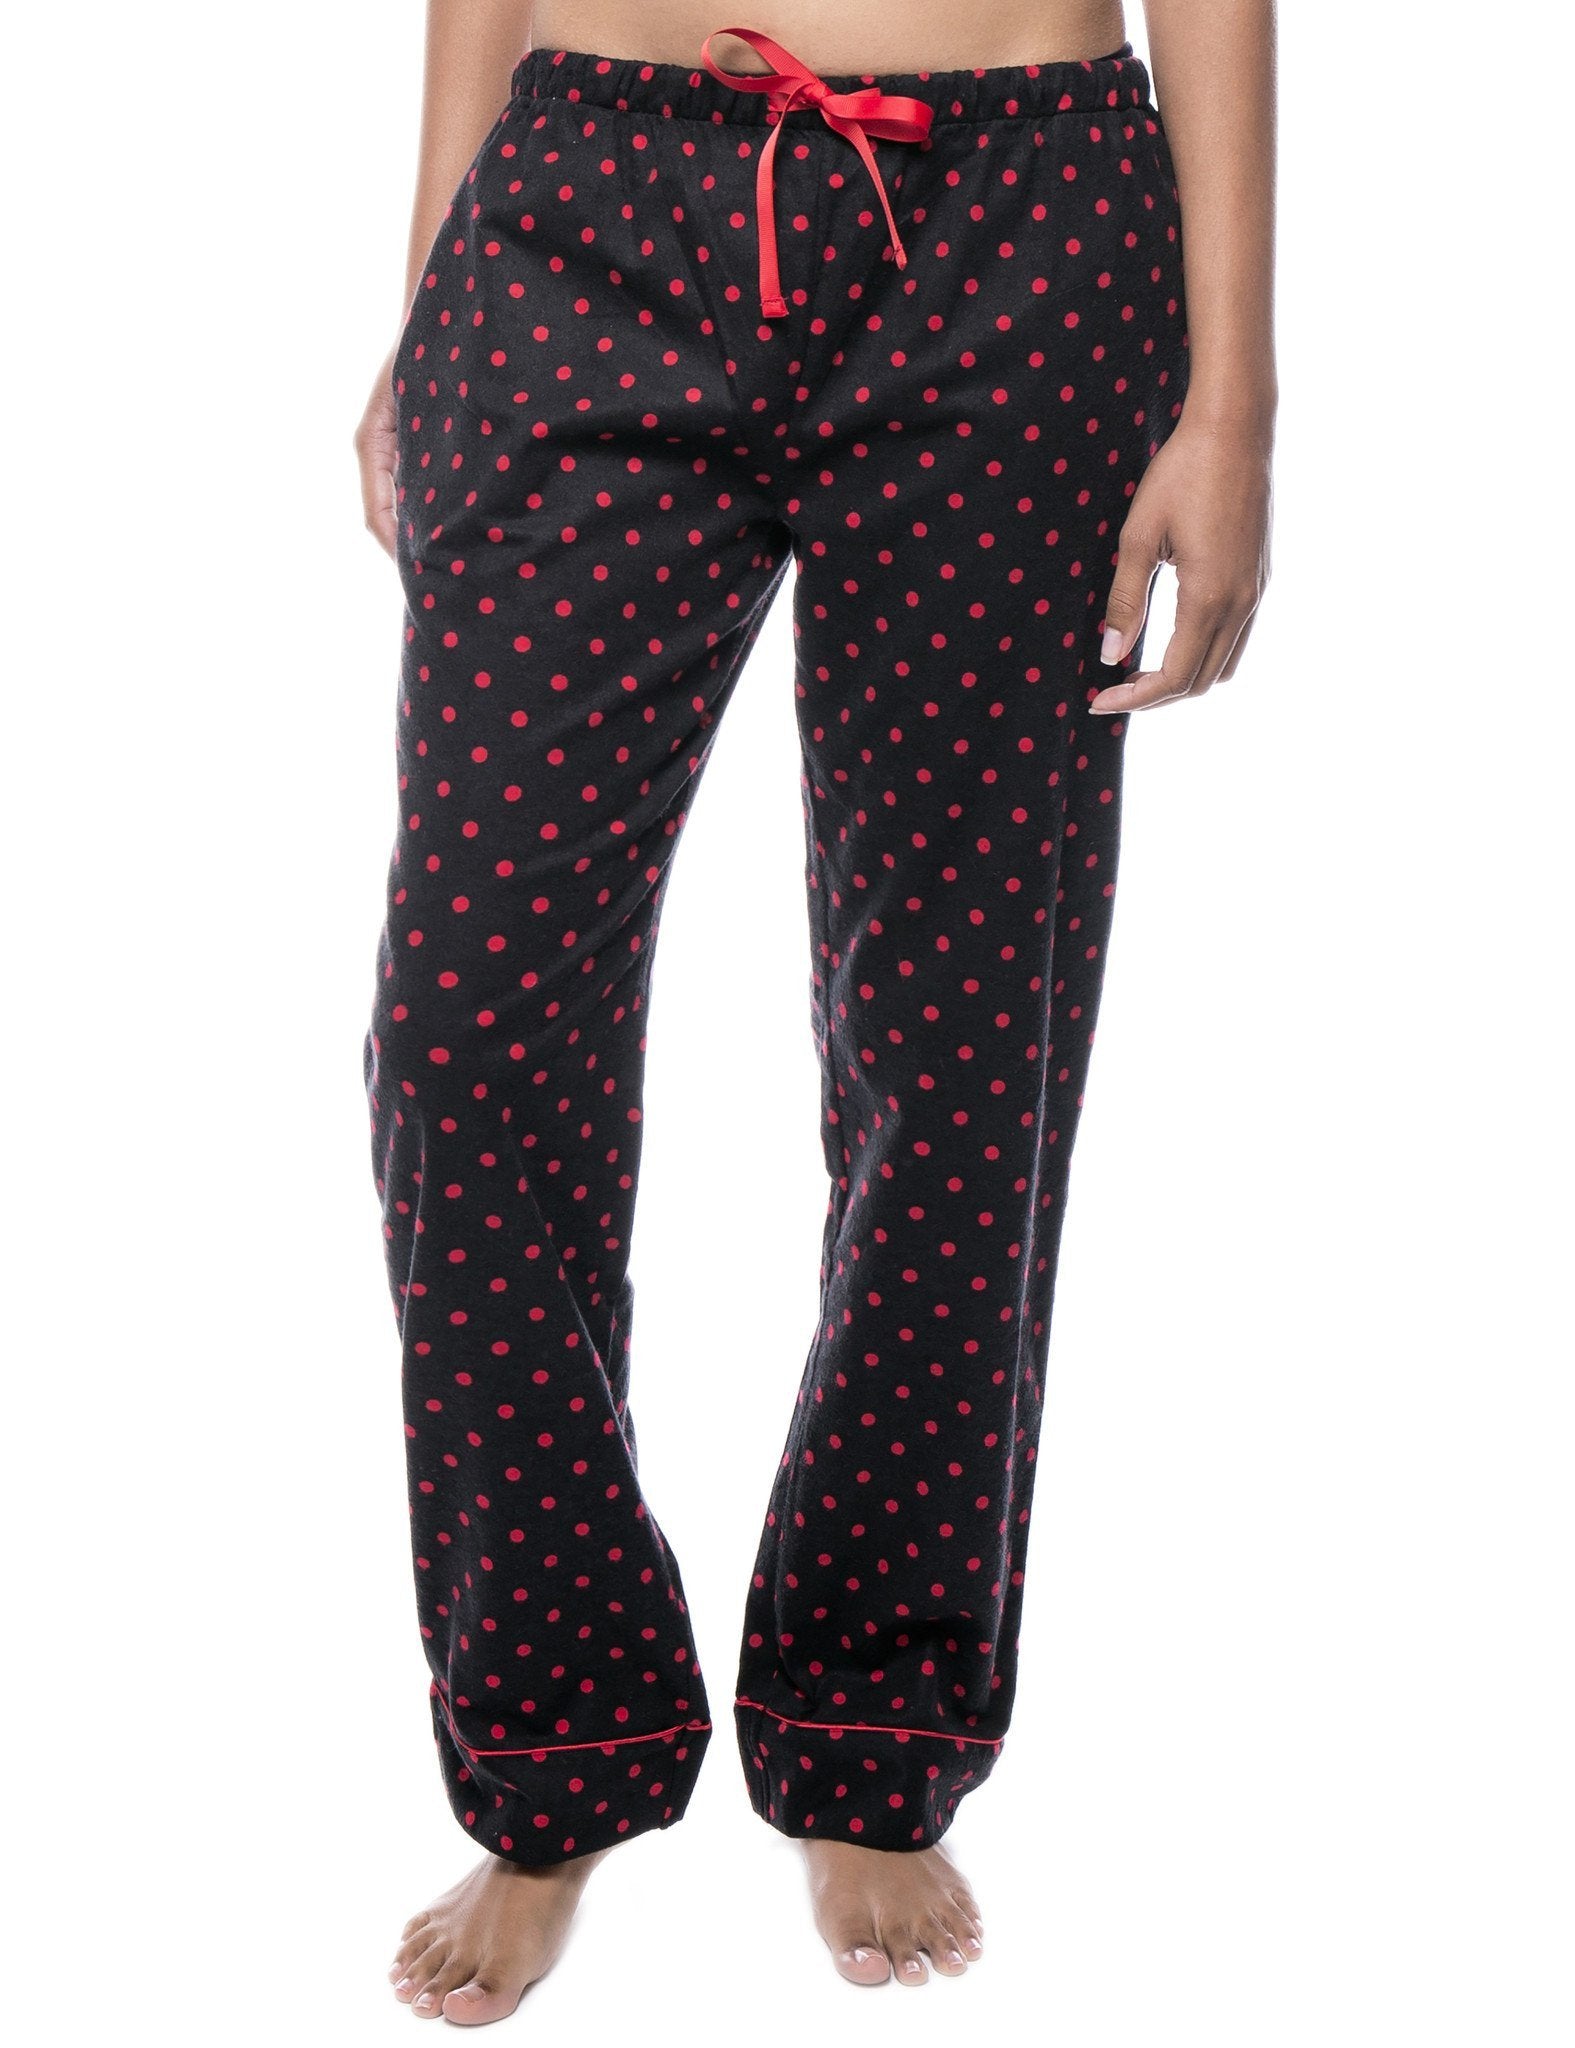 Womens 100% Cotton Flannel Lounge Pants - Dots Diva Black/Red